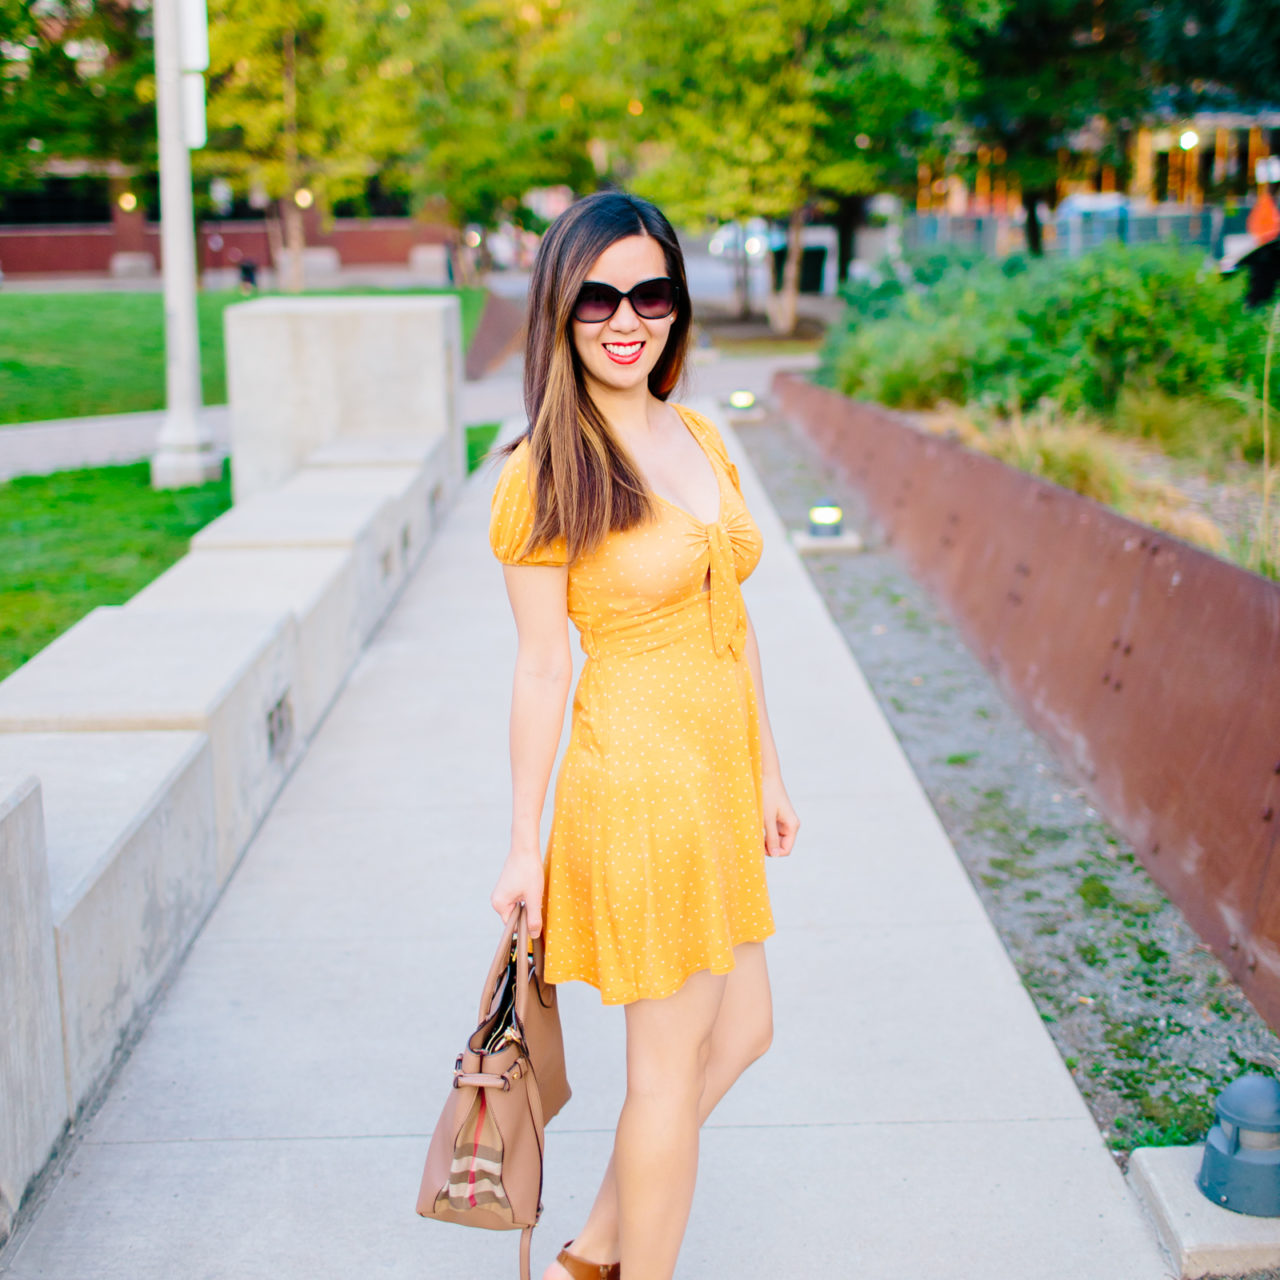 Recent Updates, Weekend Plans, and a Dress for Fall